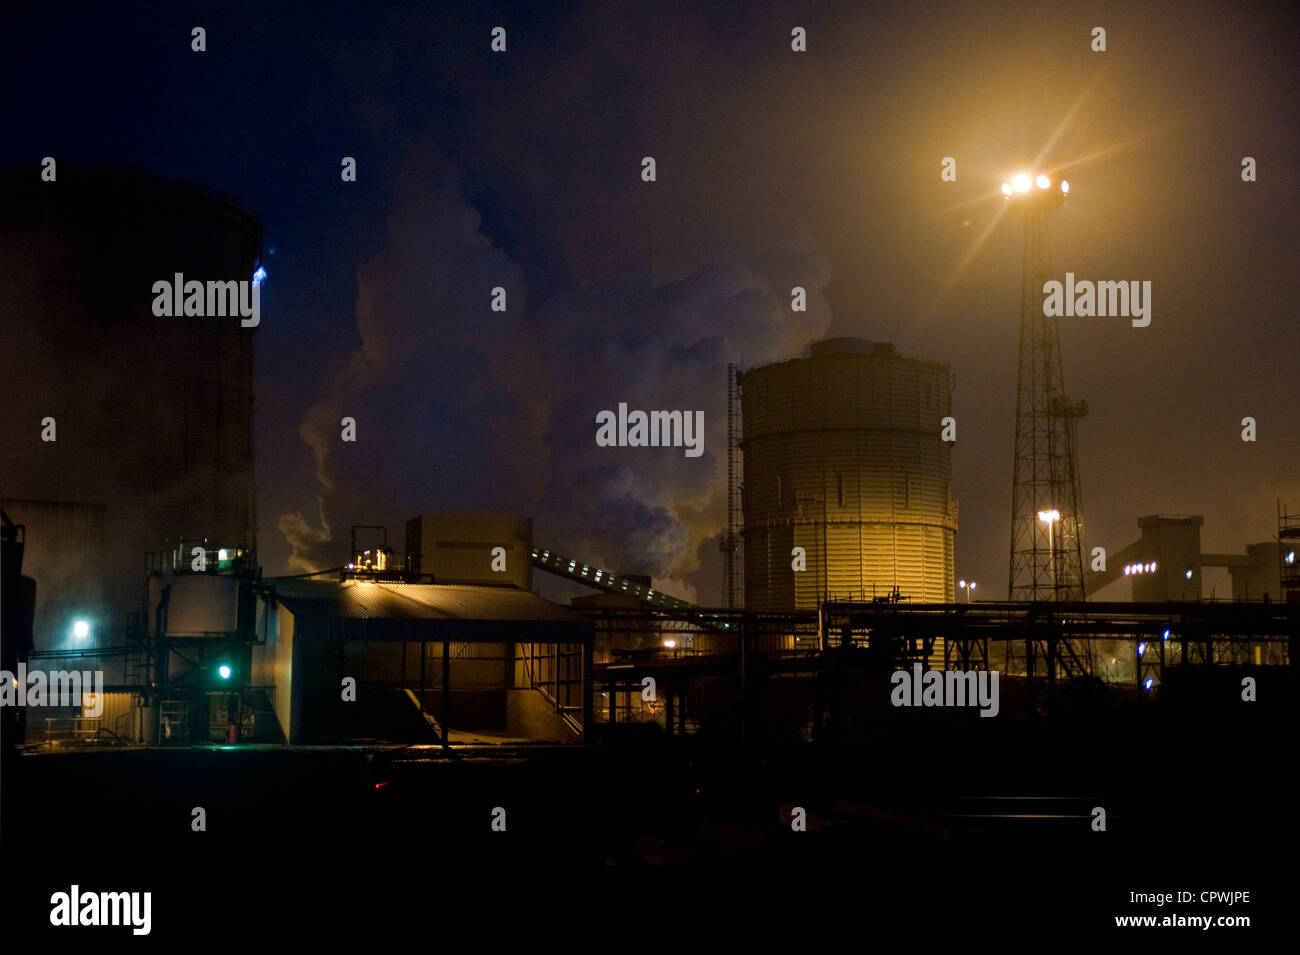 Night at the former British Steel works at Redcar, now operated by Sahaviriya Steel Industries (SSI). Stock Photo